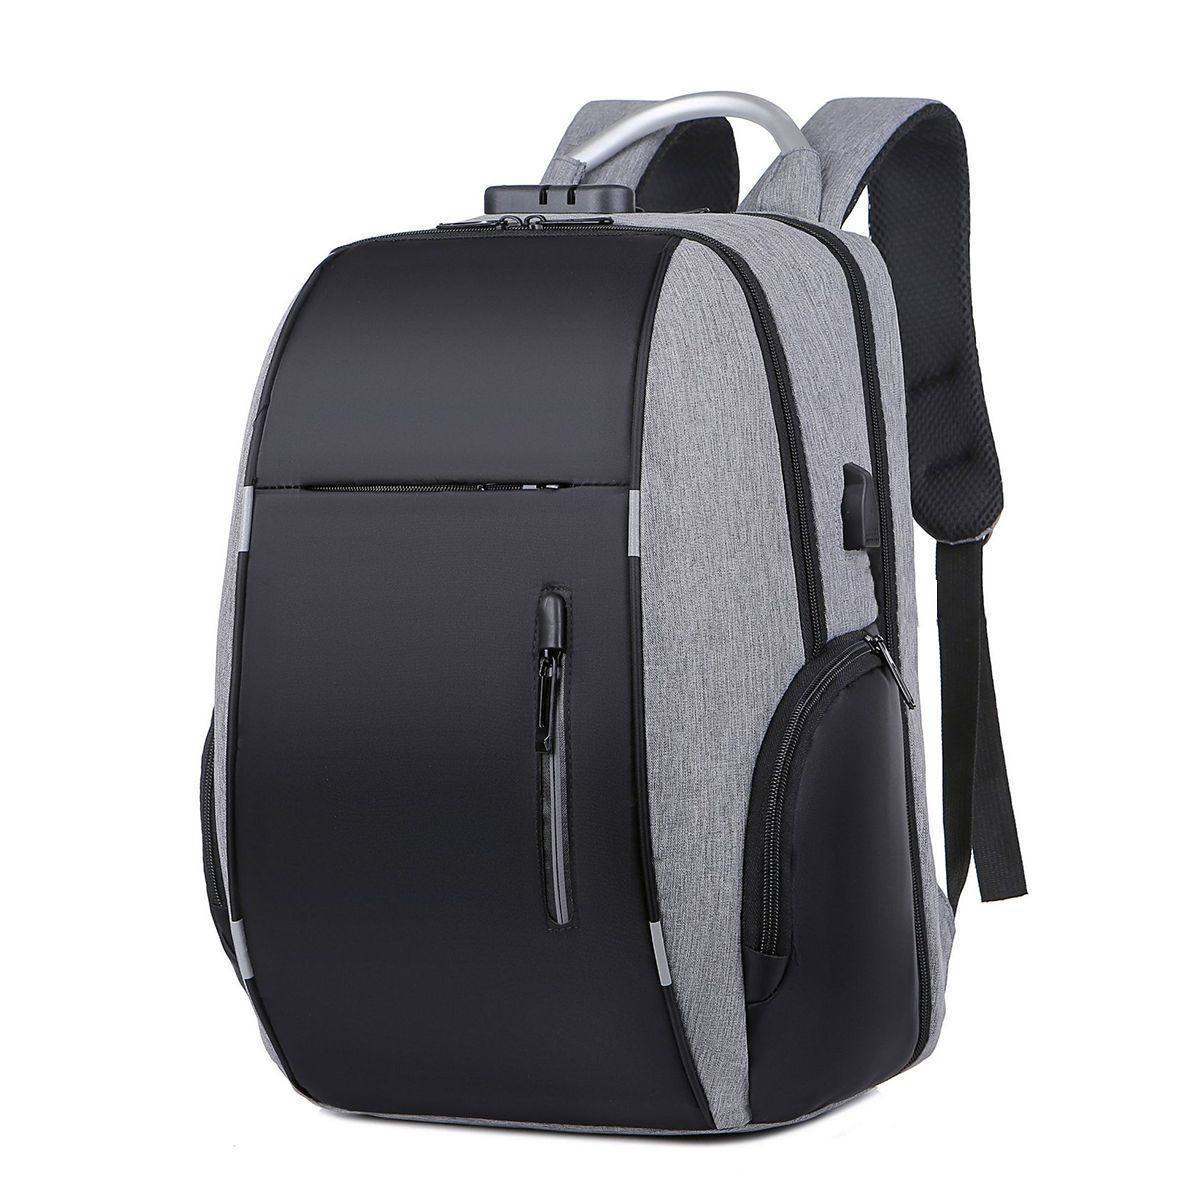 15.6inch Laptop Backpack With USB Charging Port Password Lock Travel ...